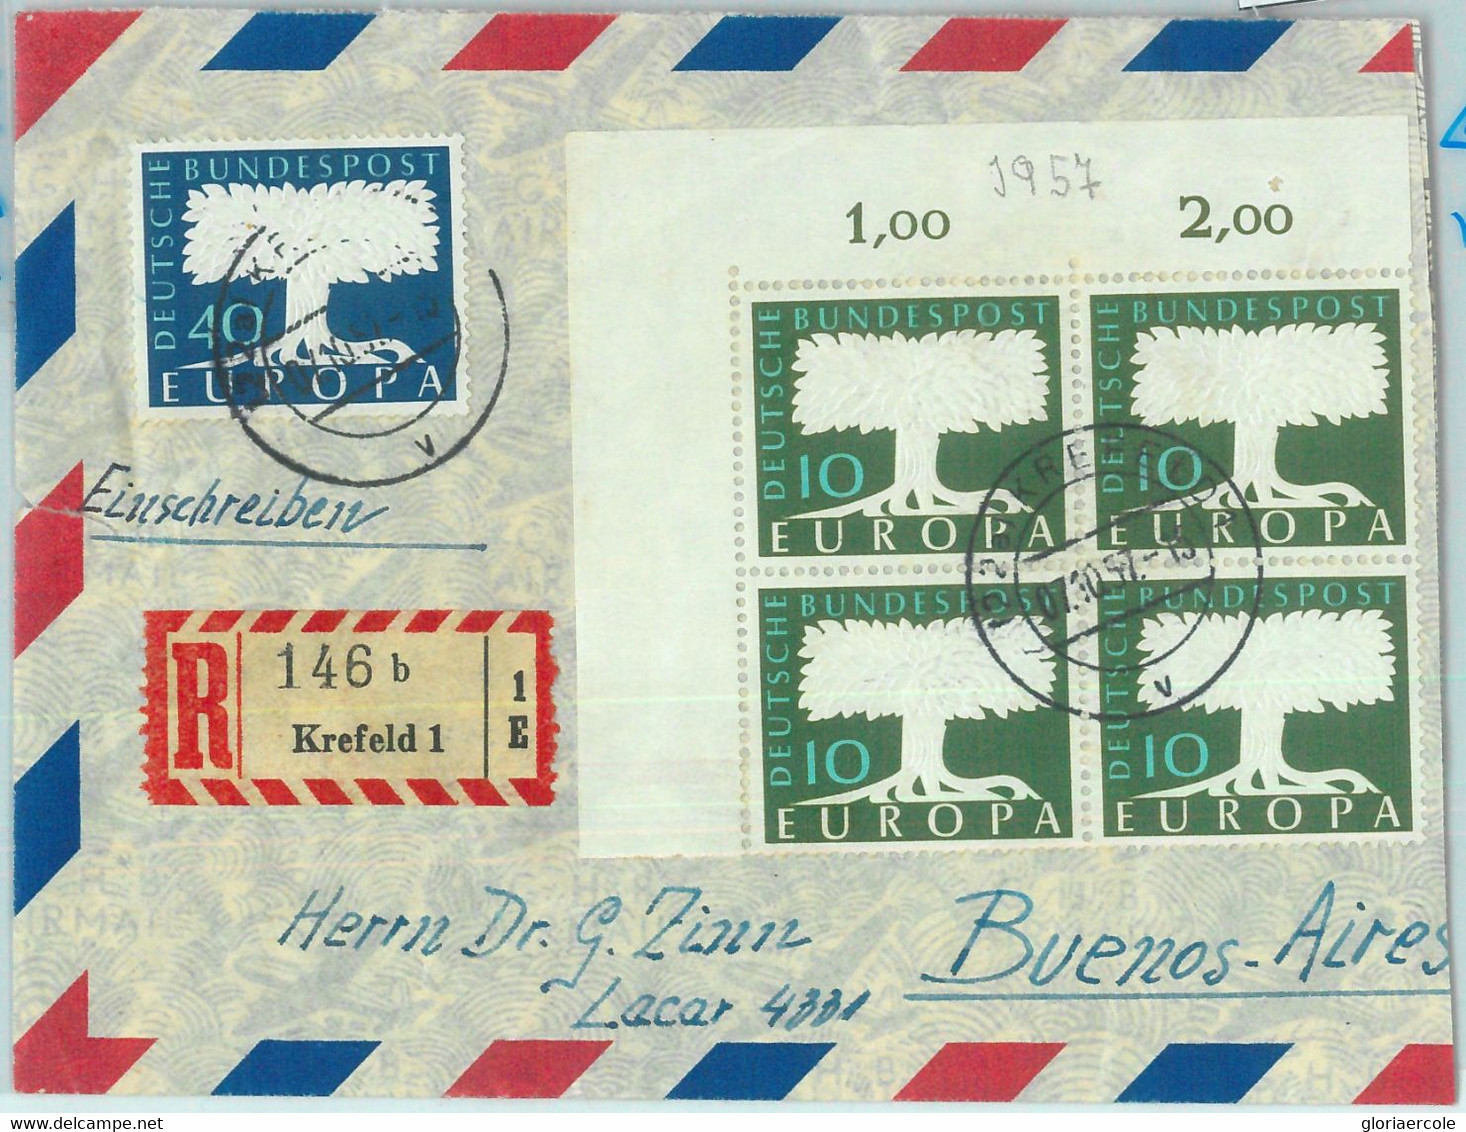 86659 - GERMANY  - Postal History -  Cover To ARGENTINA 1957   EUROPA CEPT - 1957